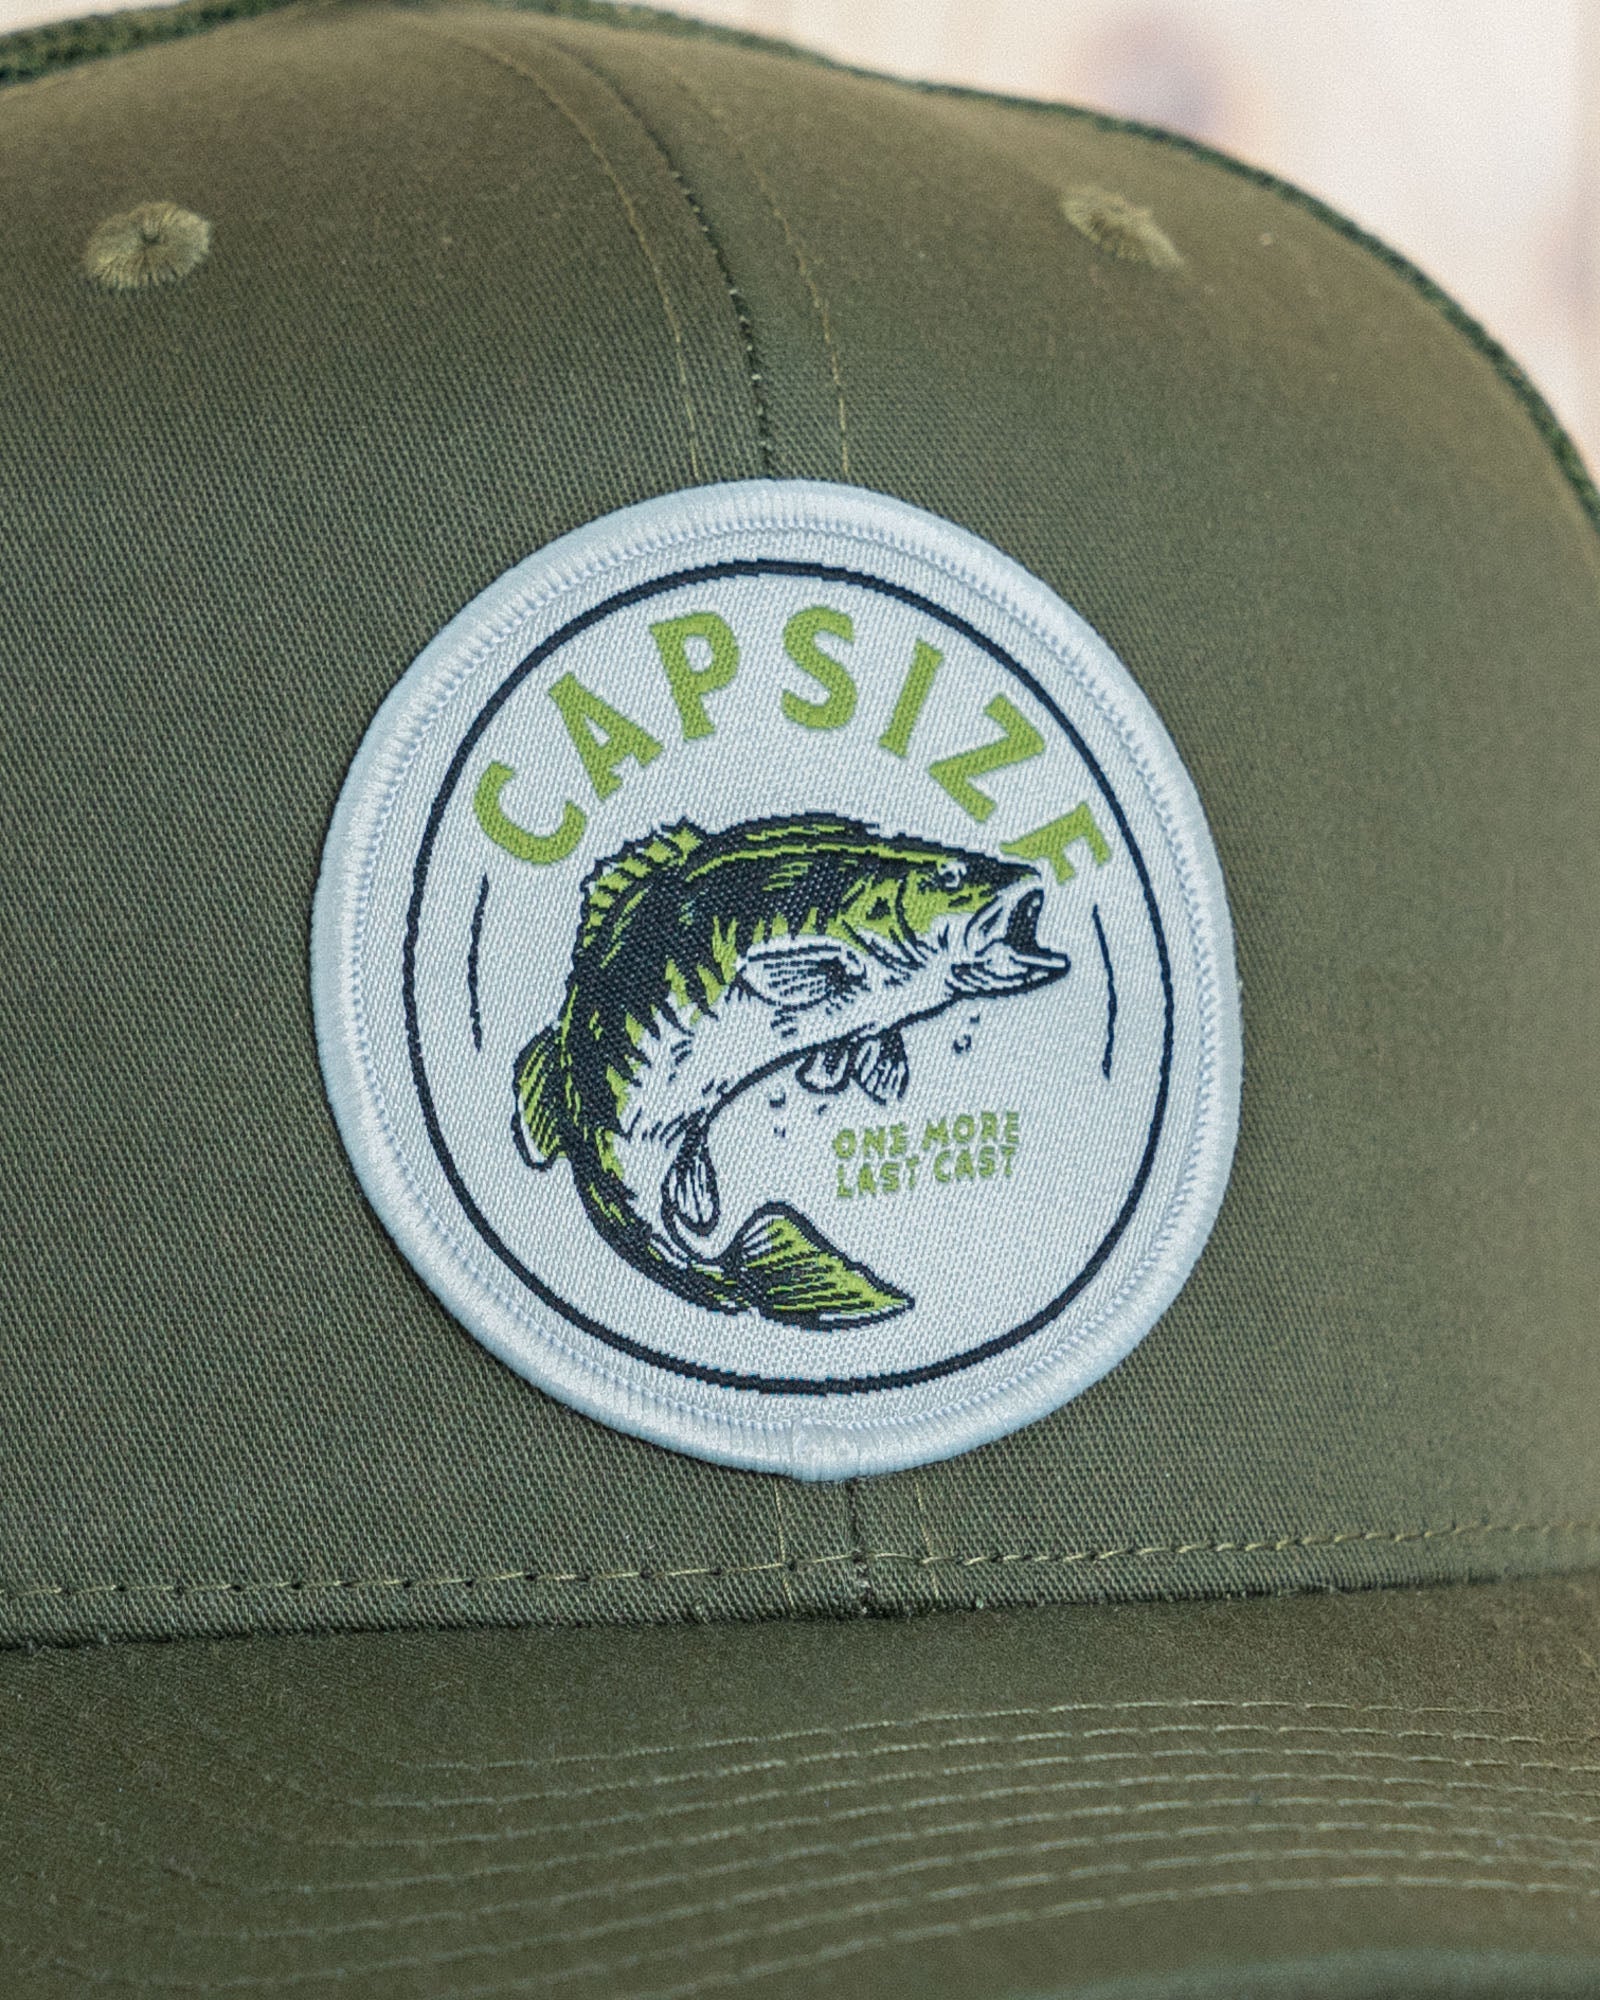 One More Last Cast Trucker Hat Capsize Fly Fishing -  Canada